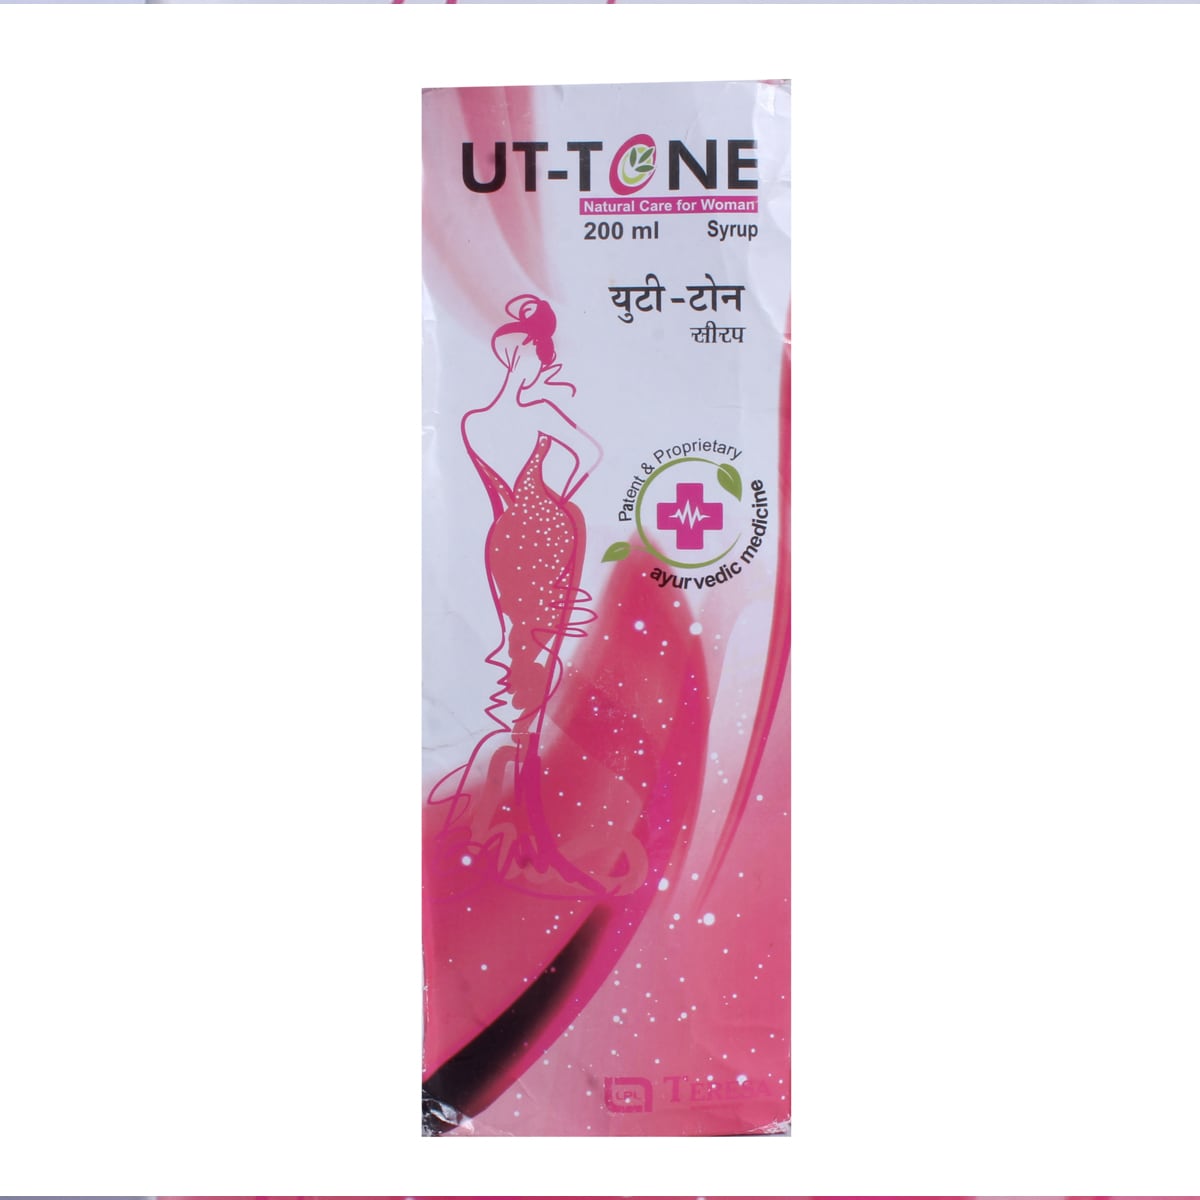 UT Tone Syrup 200 ml, Pack of 1 